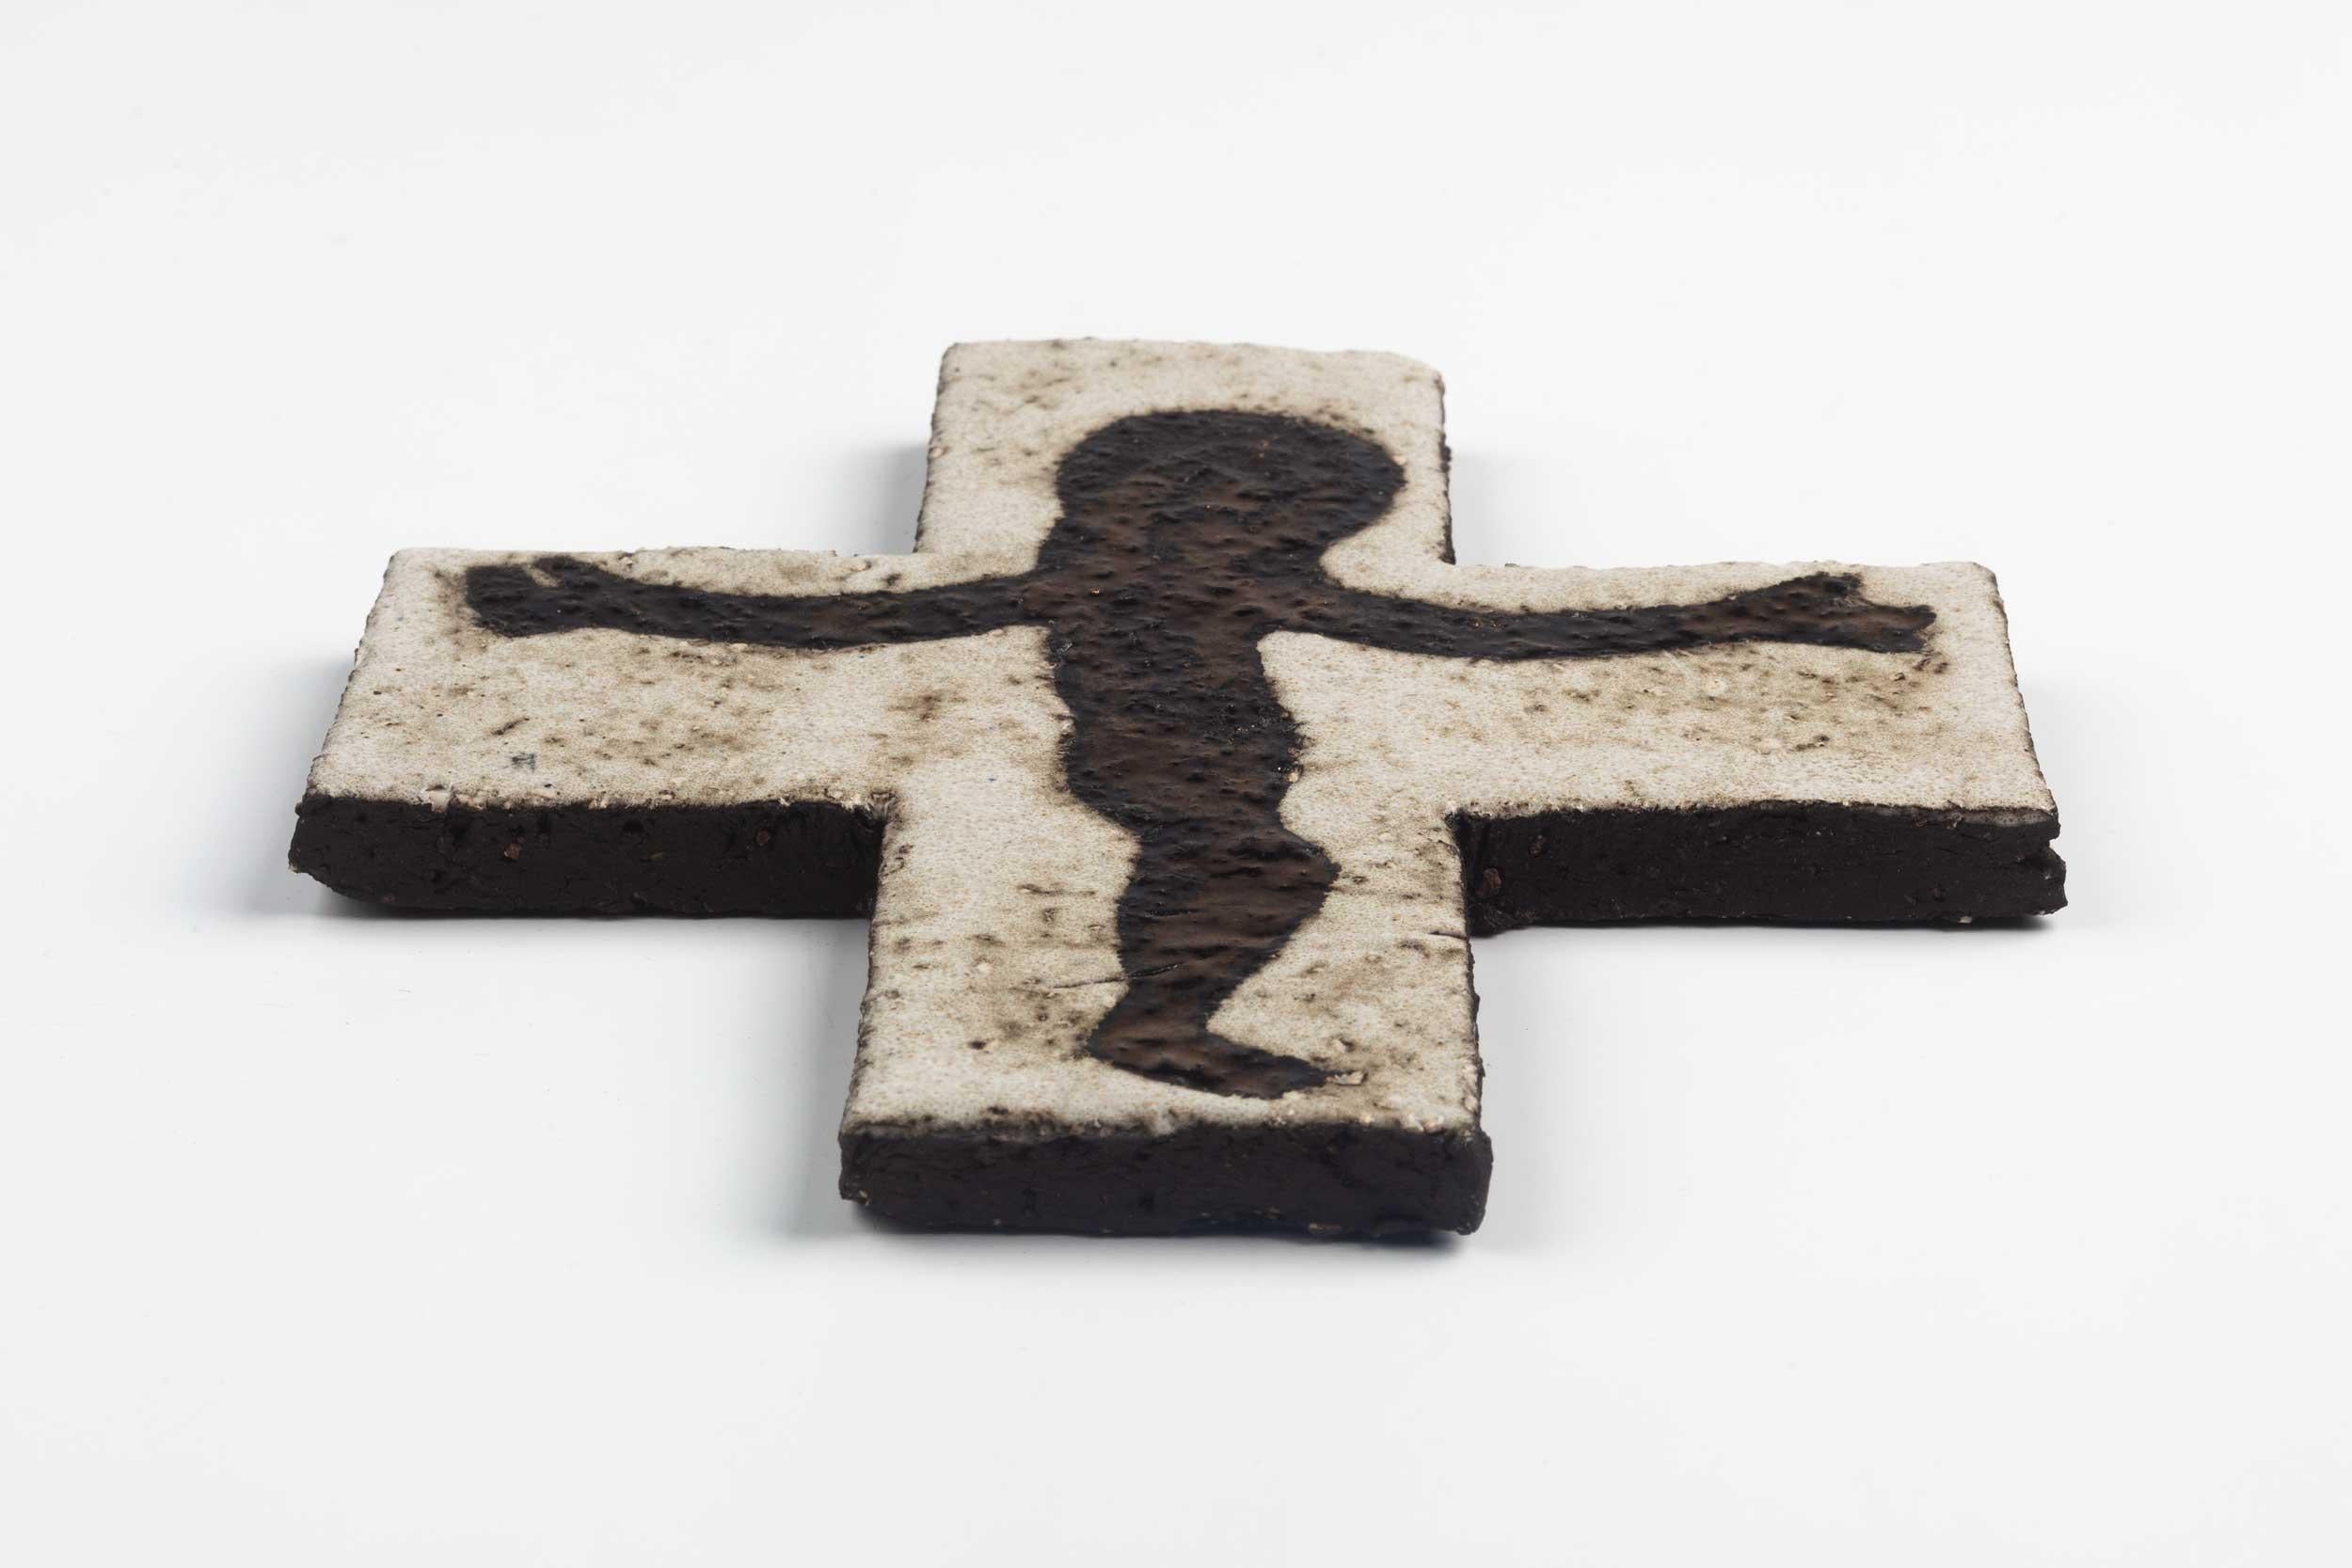 Midcentury European wall cross hand painted in white, and gold flecked black. Shimmering with an otherworldly Christ figure. From a large collection of vintage crosses handmade by Flemish artisans.

From modernism to brutalism, the crosses in our